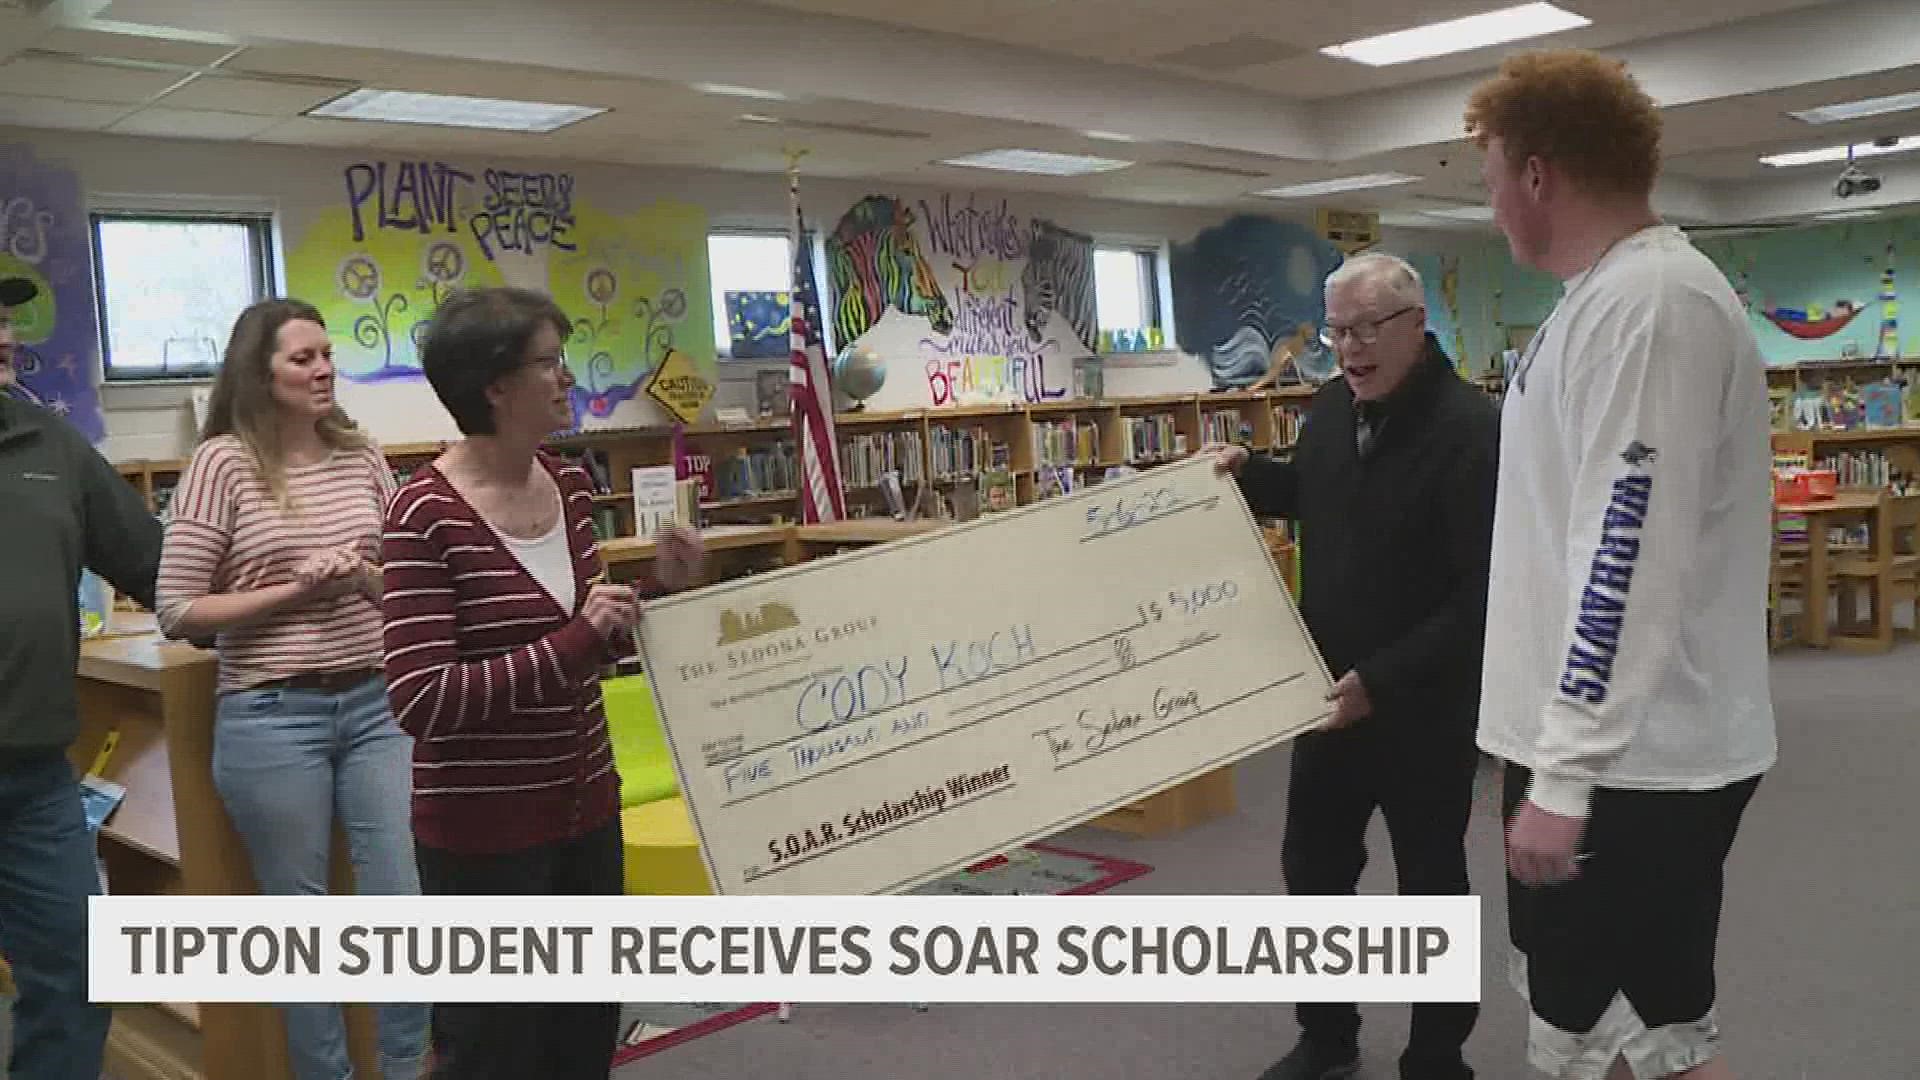 18-year-old Cody Koch of Tipton is one of three high school seniors who are receiving a $5,000 SOAR scholarship from The Sedona Group and WQAD News 8 this year.